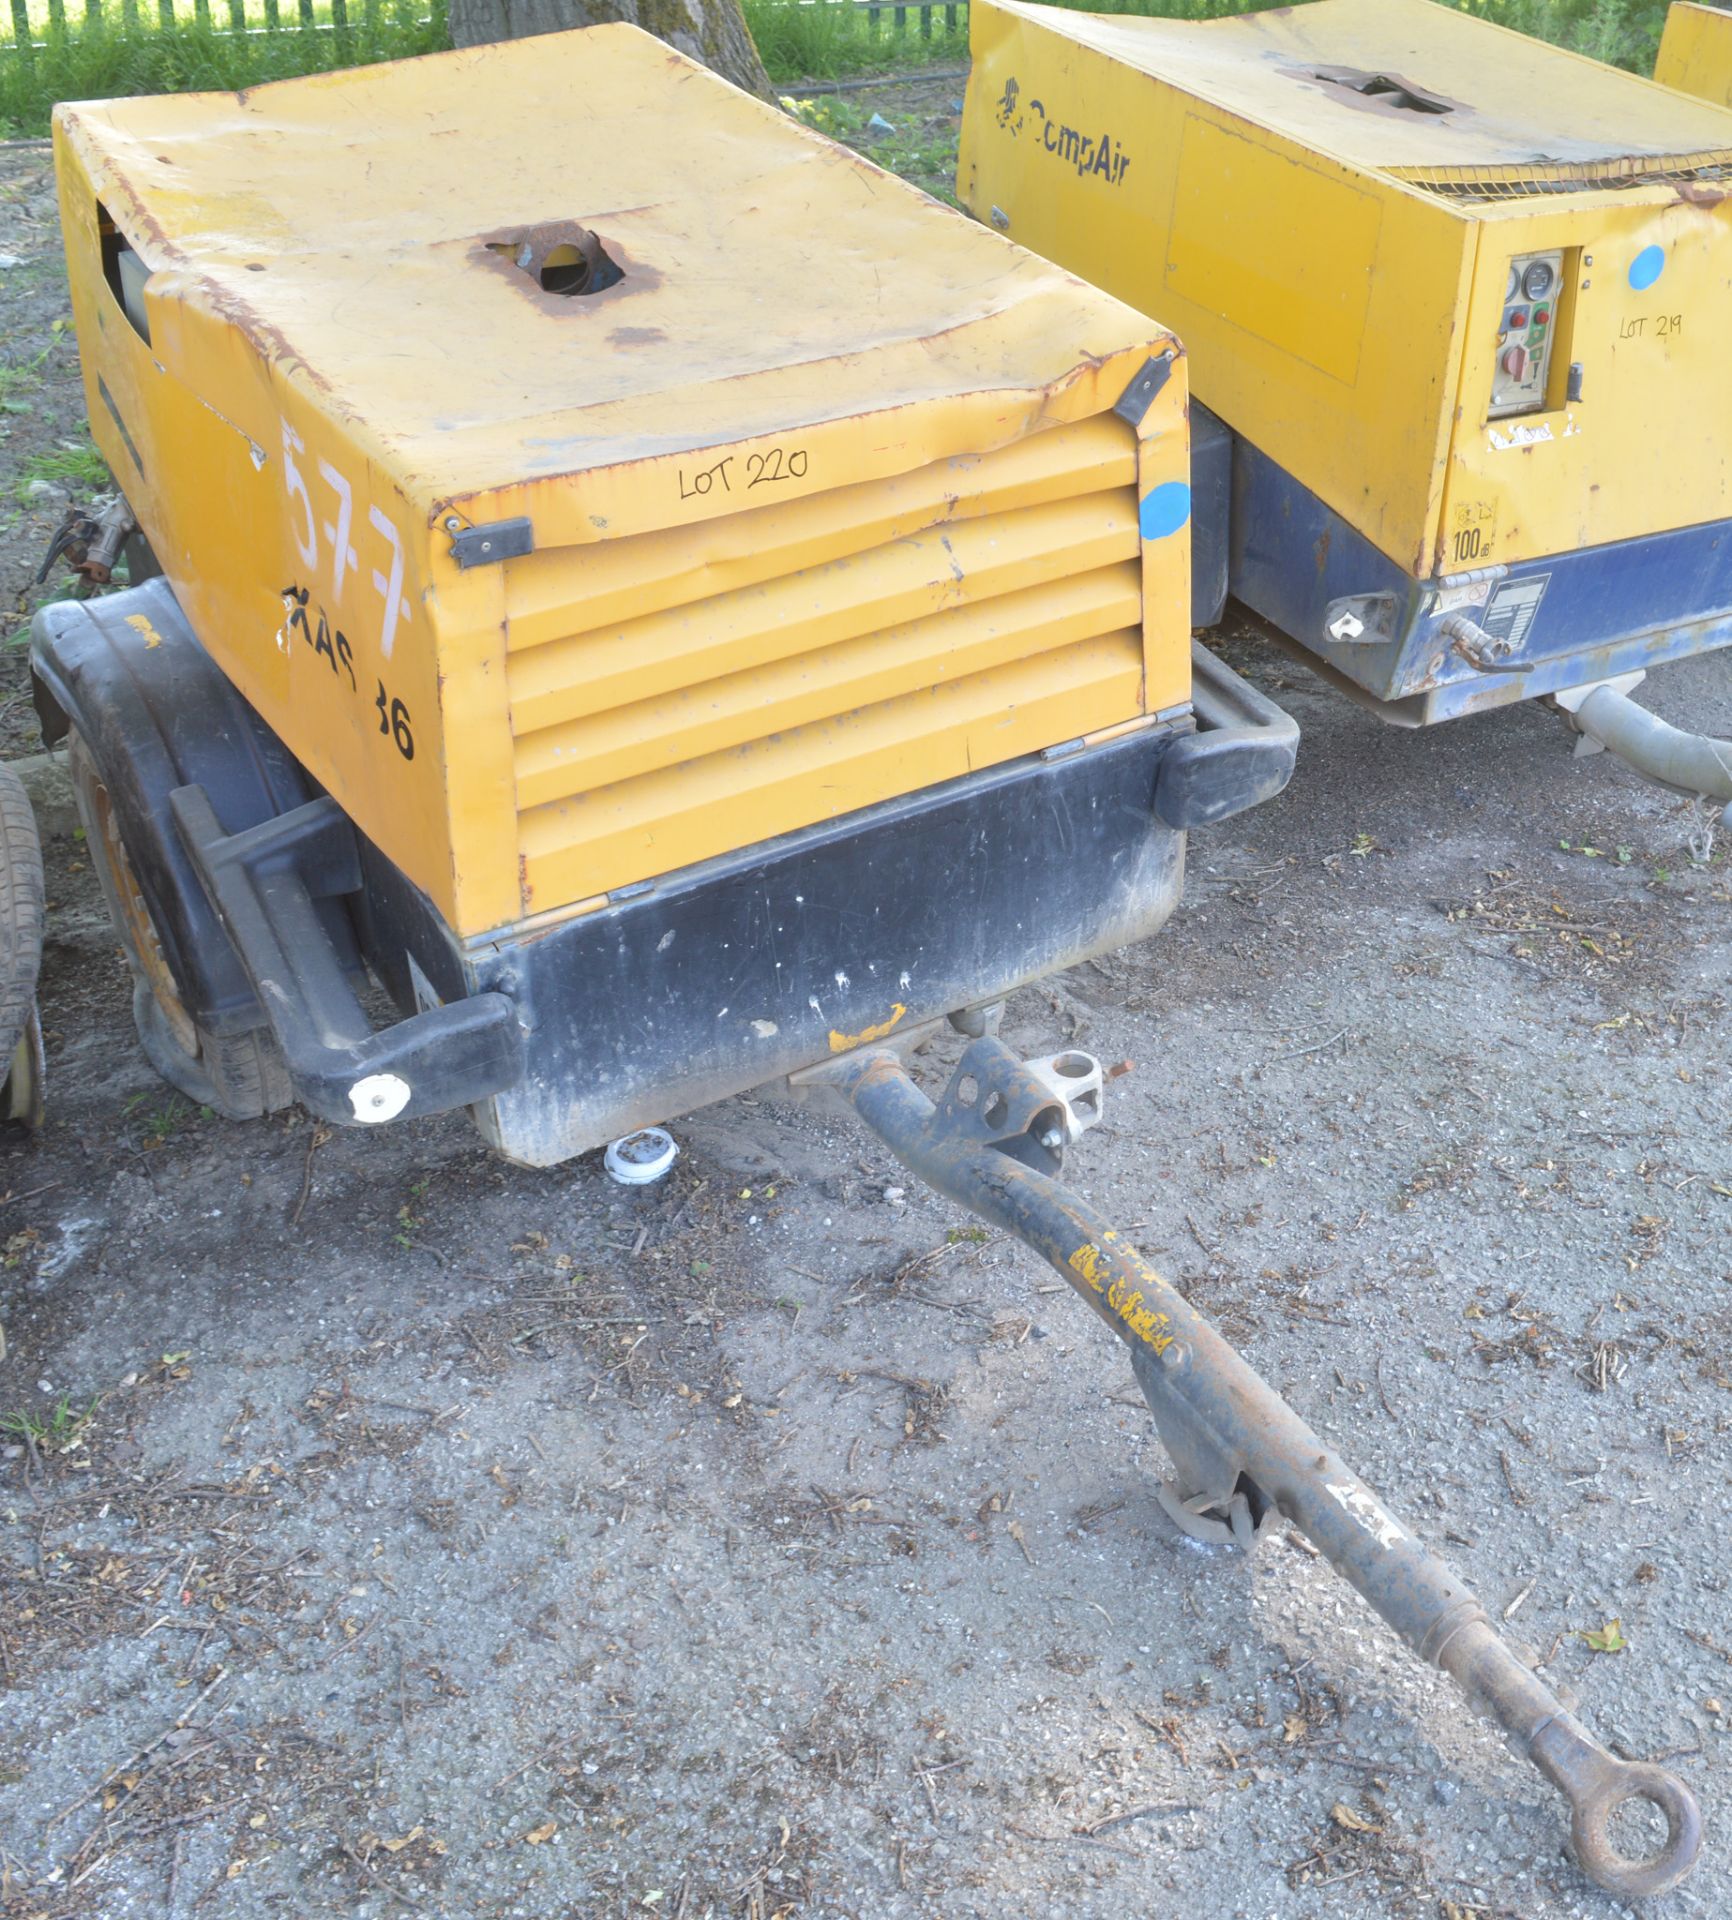 Atlas Copco diesel driven fast tow air compressor Recorded hours: 1187 577